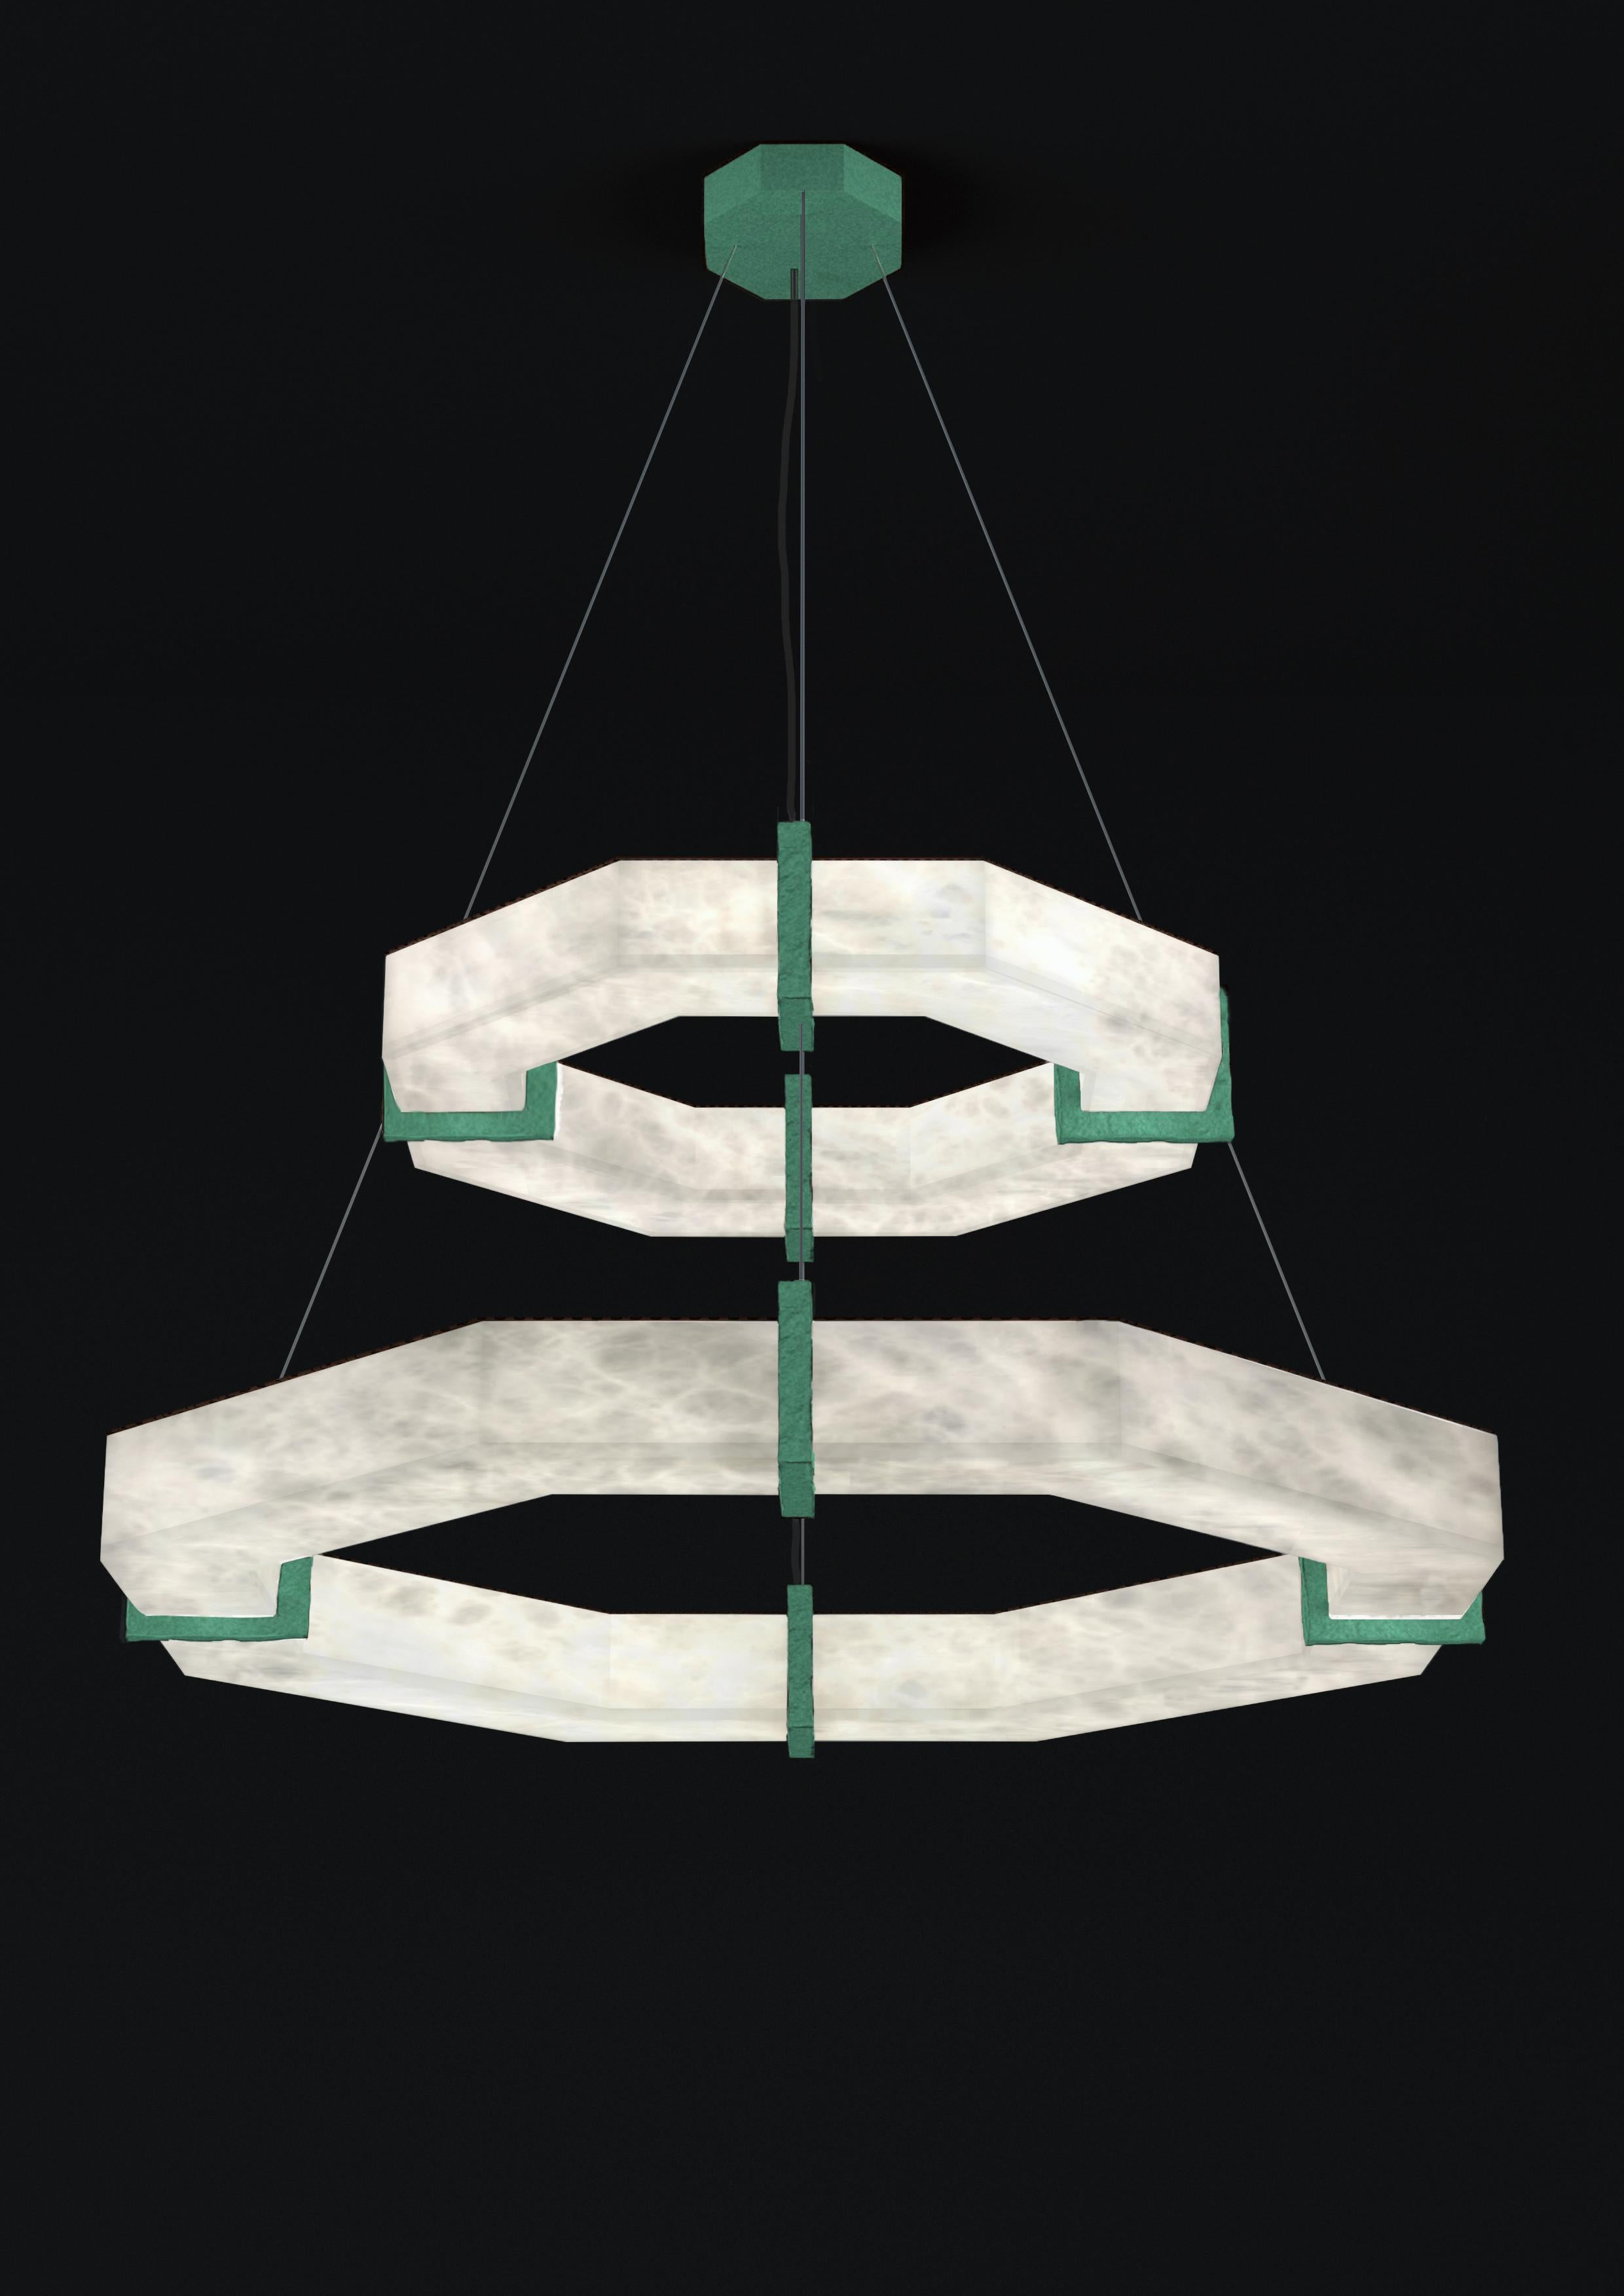 Efesto Freedom Green Metal Double Pendant Lamp by Alabastro Italiano
Dimensions: D 80.5 x W 80.5 x H 36.5 cm.
Materials: White alabaster and metal.

Available in different finishes: Shiny Silver, Bronze, Brushed Brass, Ruggine of Florence, Brushed